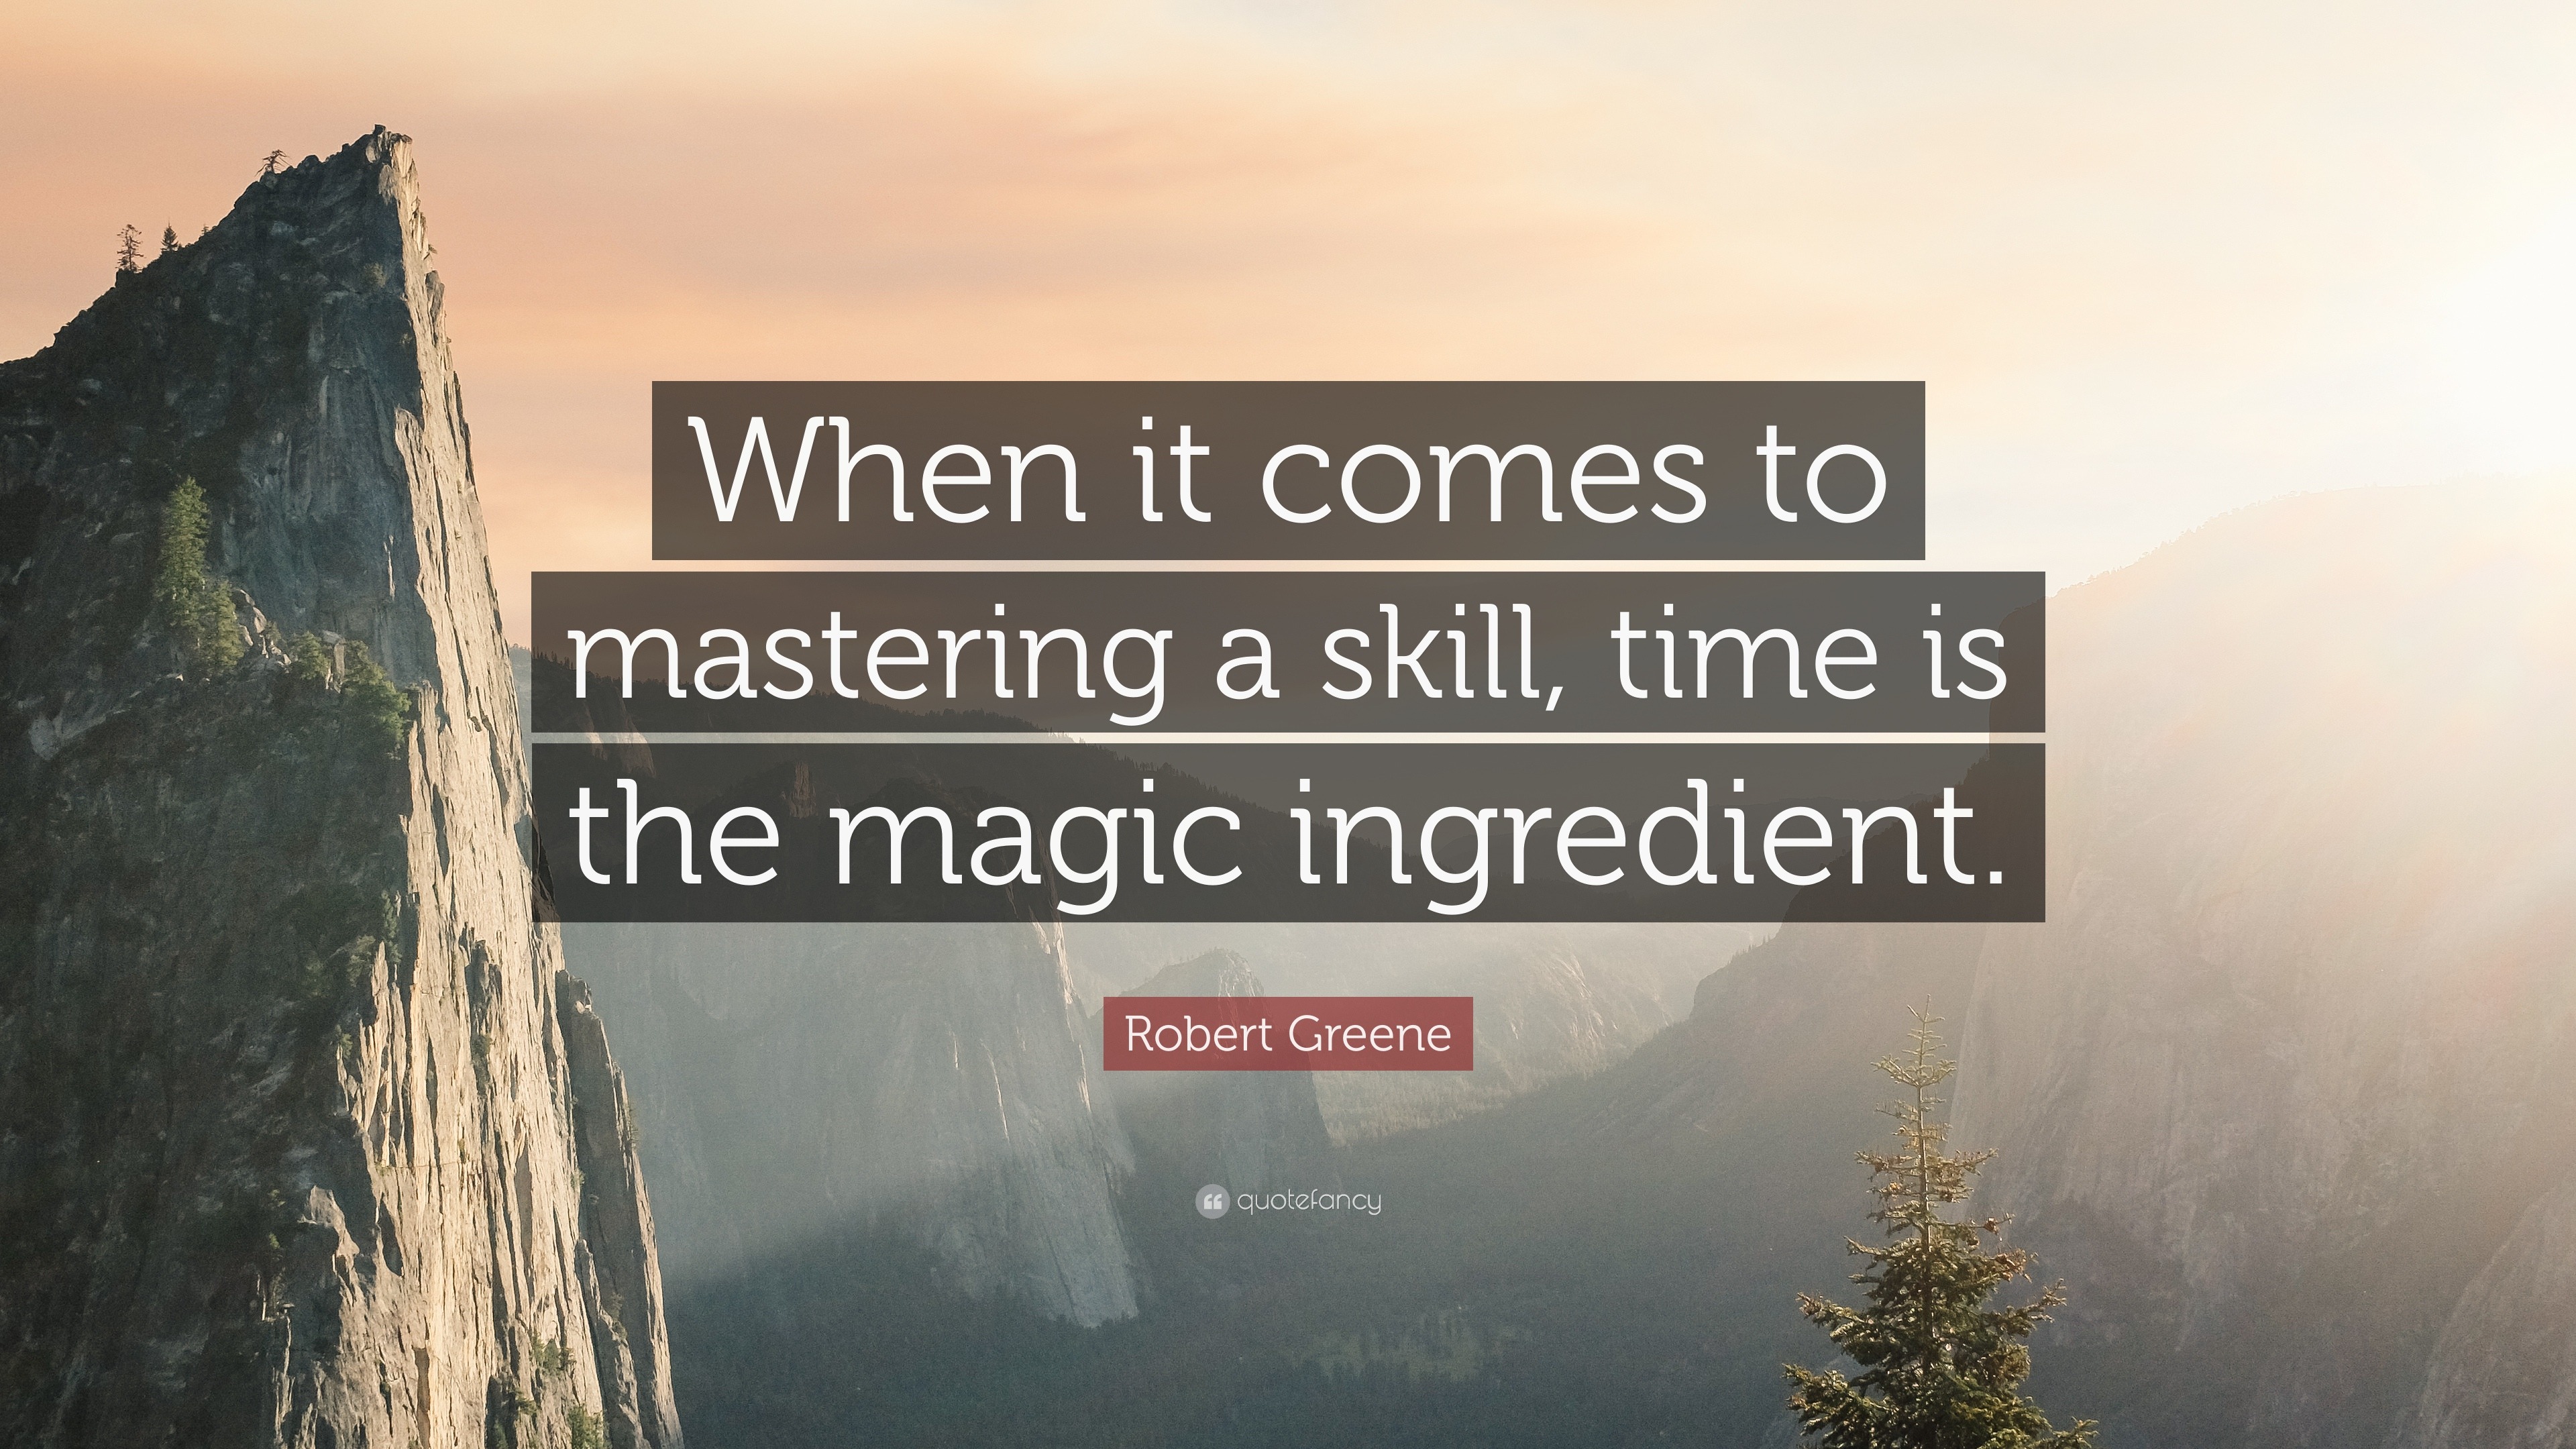 Robert Greene Quote: "When it comes to mastering a skill, time is the ...